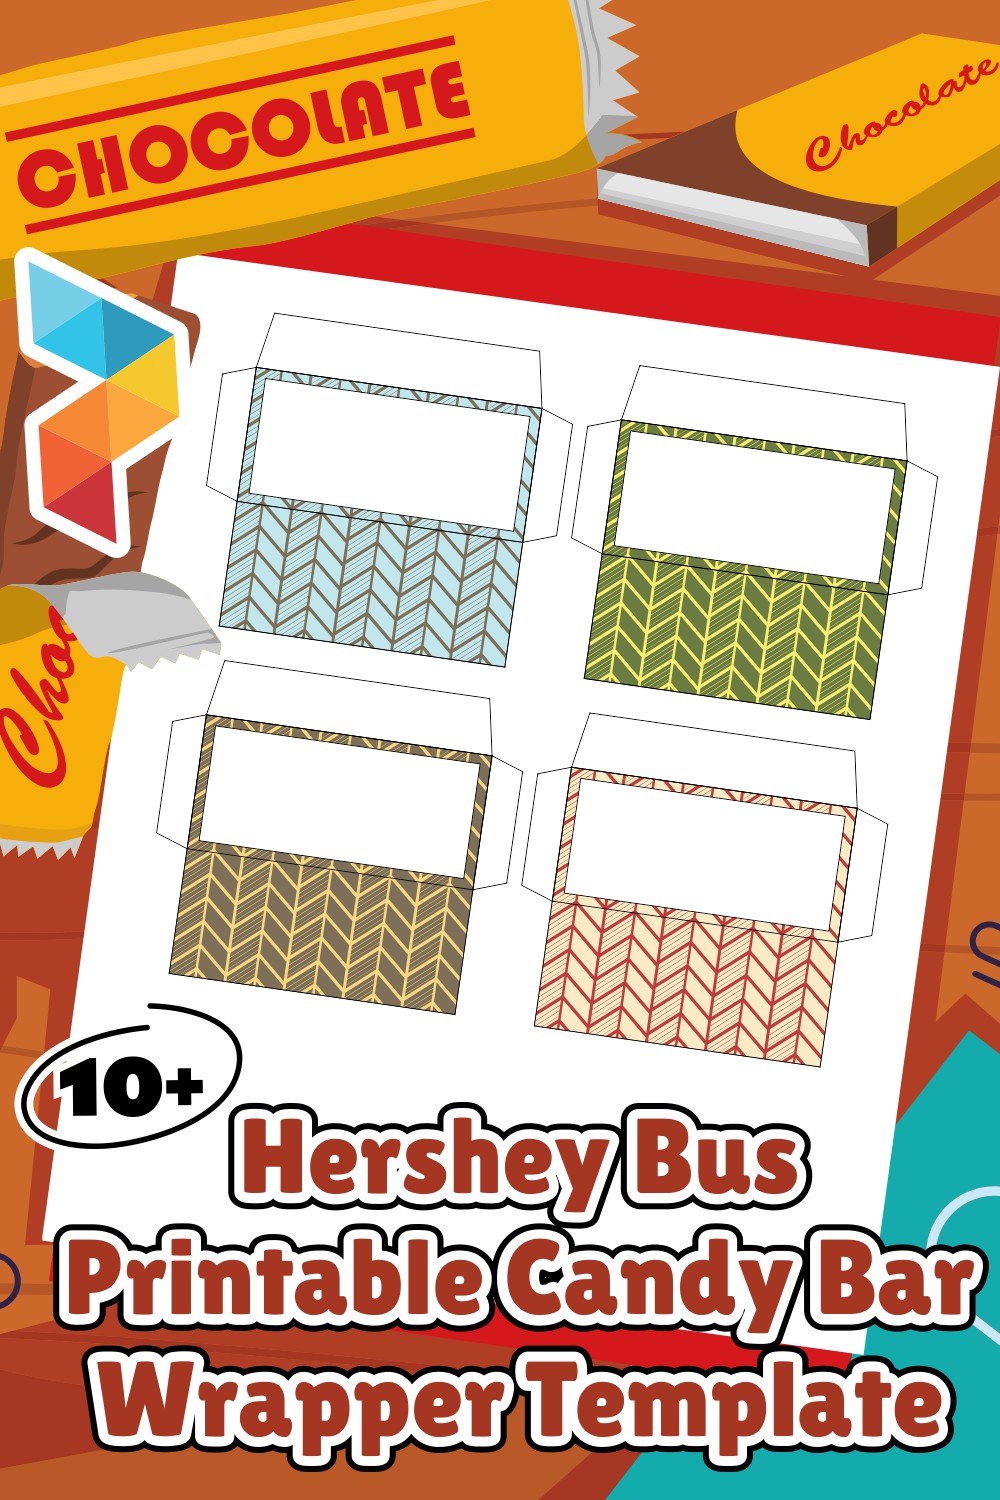 Hershey Bus Candy Bar Wrapper Template